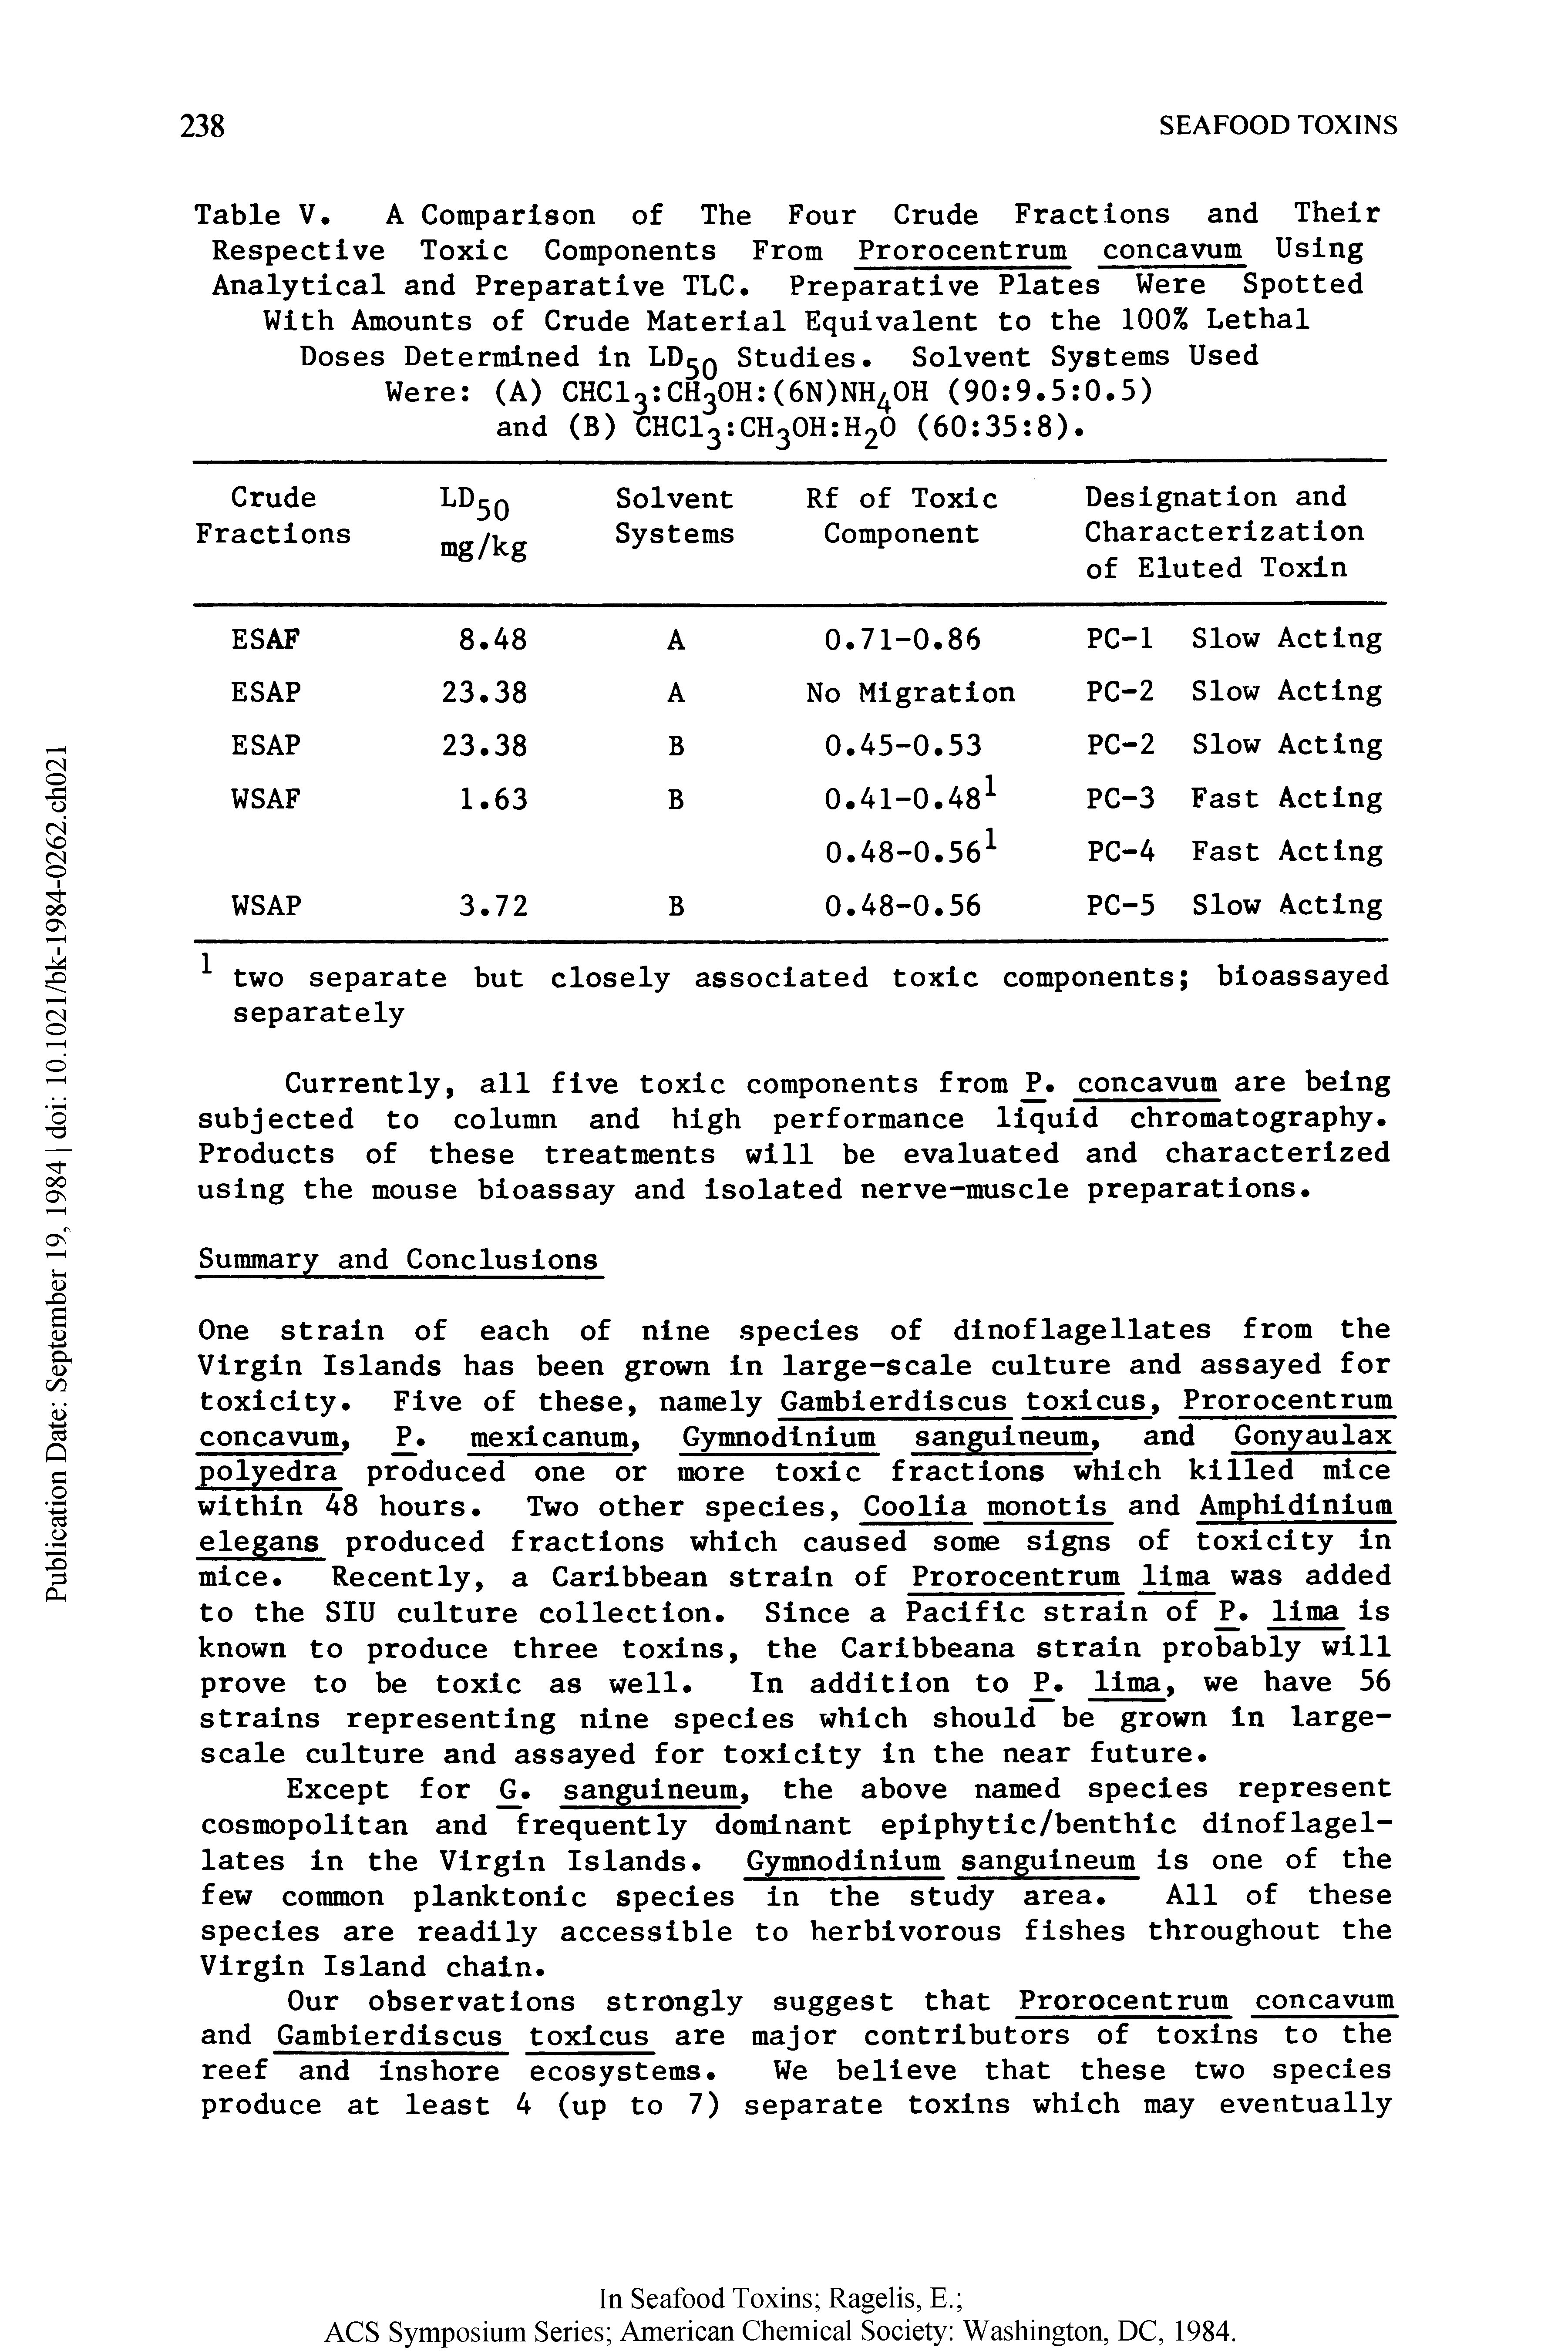 Table V. A Comparison of The Four Crude Fractions and Their Respective Toxic Components From Prorocentrum concavum Using Analytical and Preparative TLC.